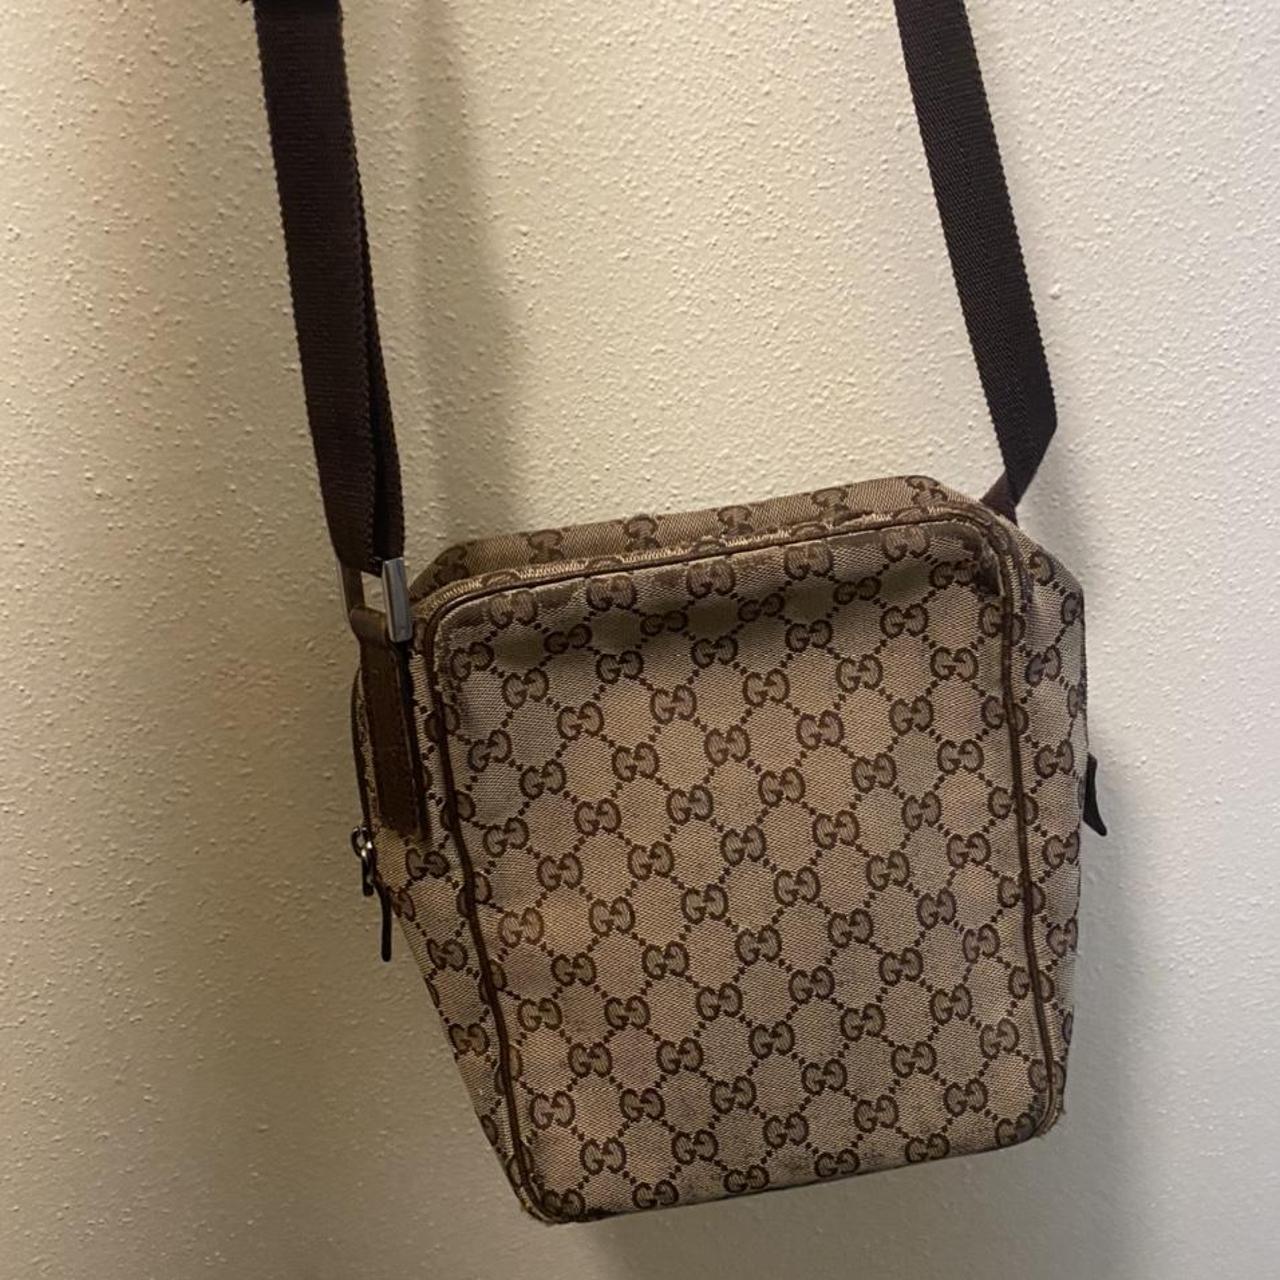 100% Authentic Gucci Sidebag - Depop